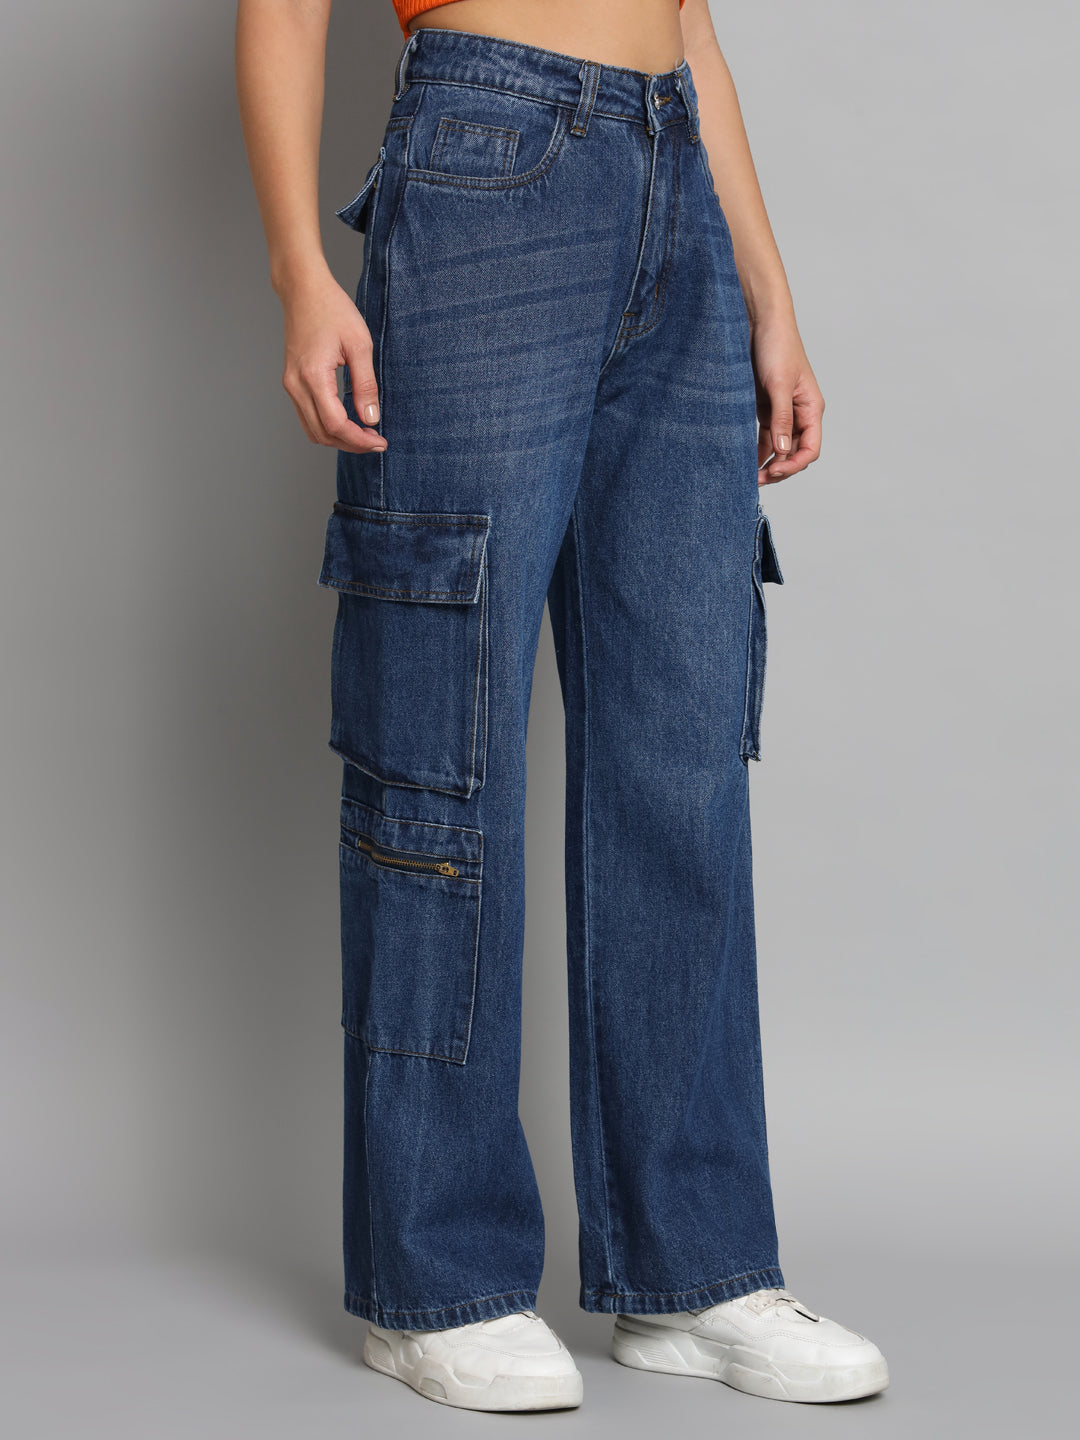 Straight Fit Women cargo jeans at Rs 450/piece in New Delhi